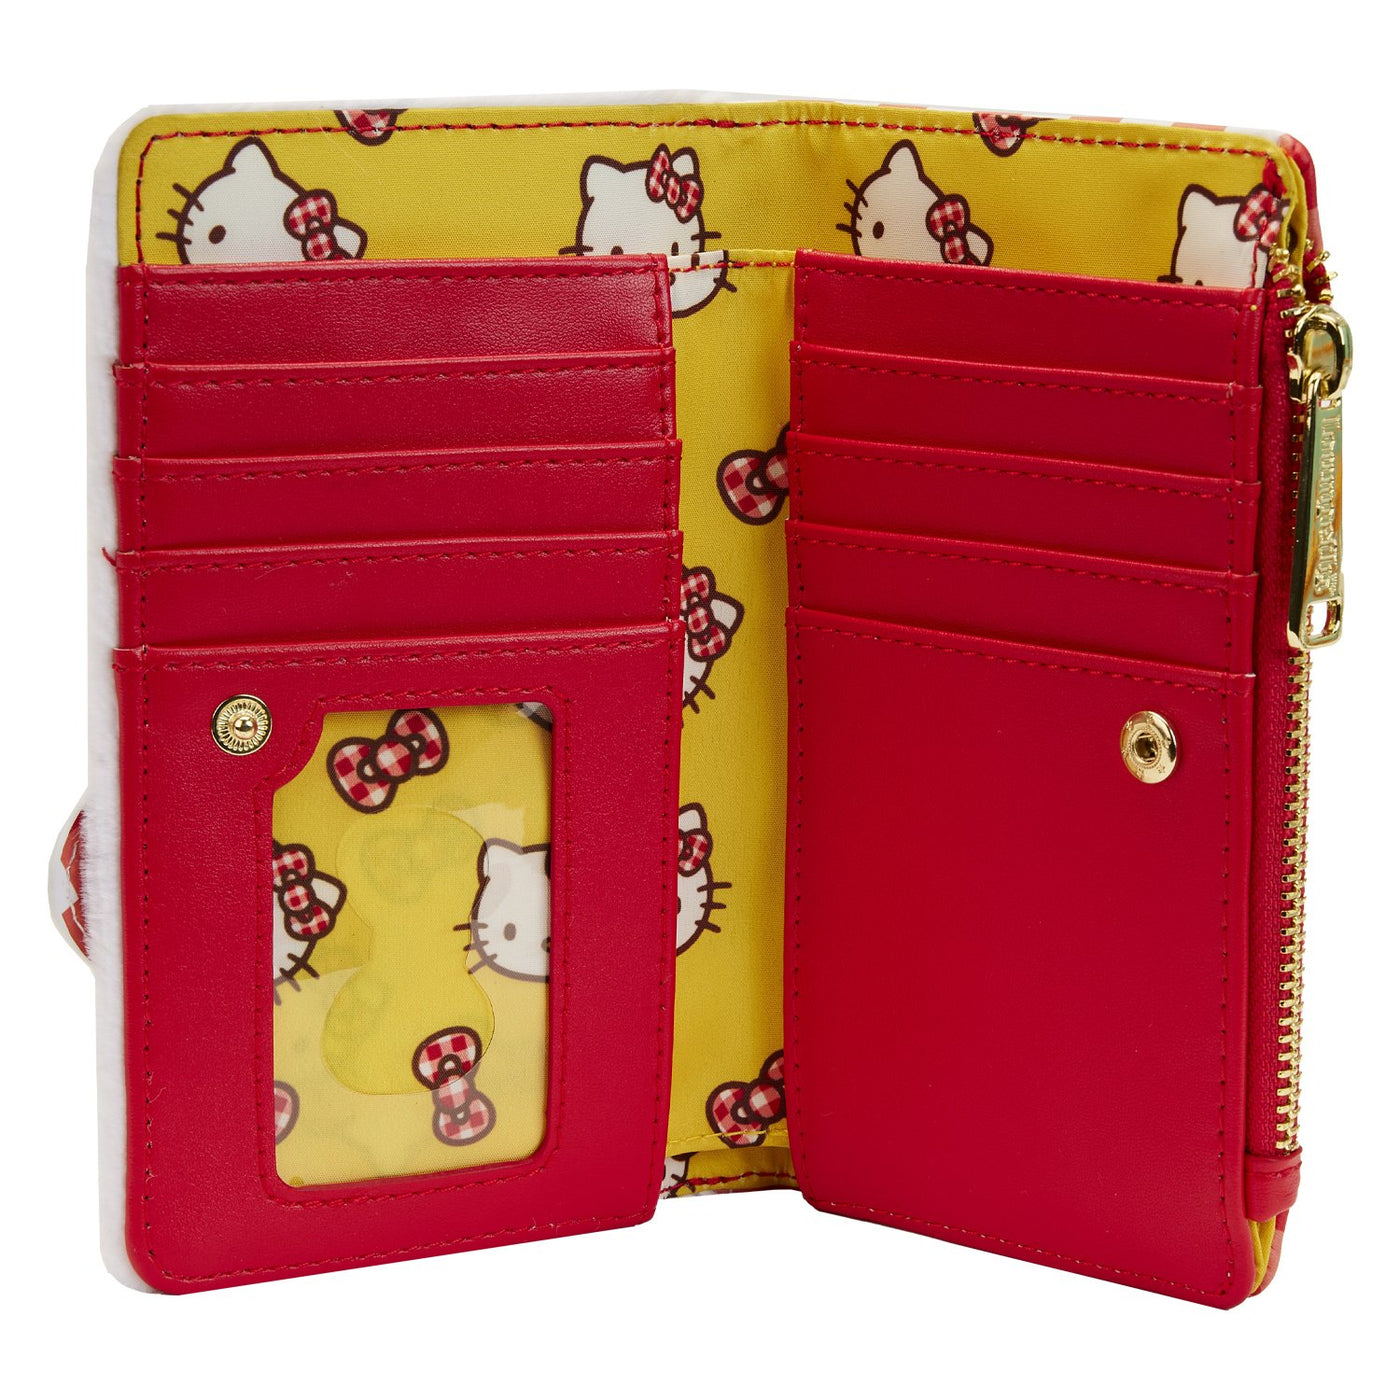 671803447318 - Loungefly Sanrio Hello Kitty Gingham Cosplay Flap Wallet - Interior